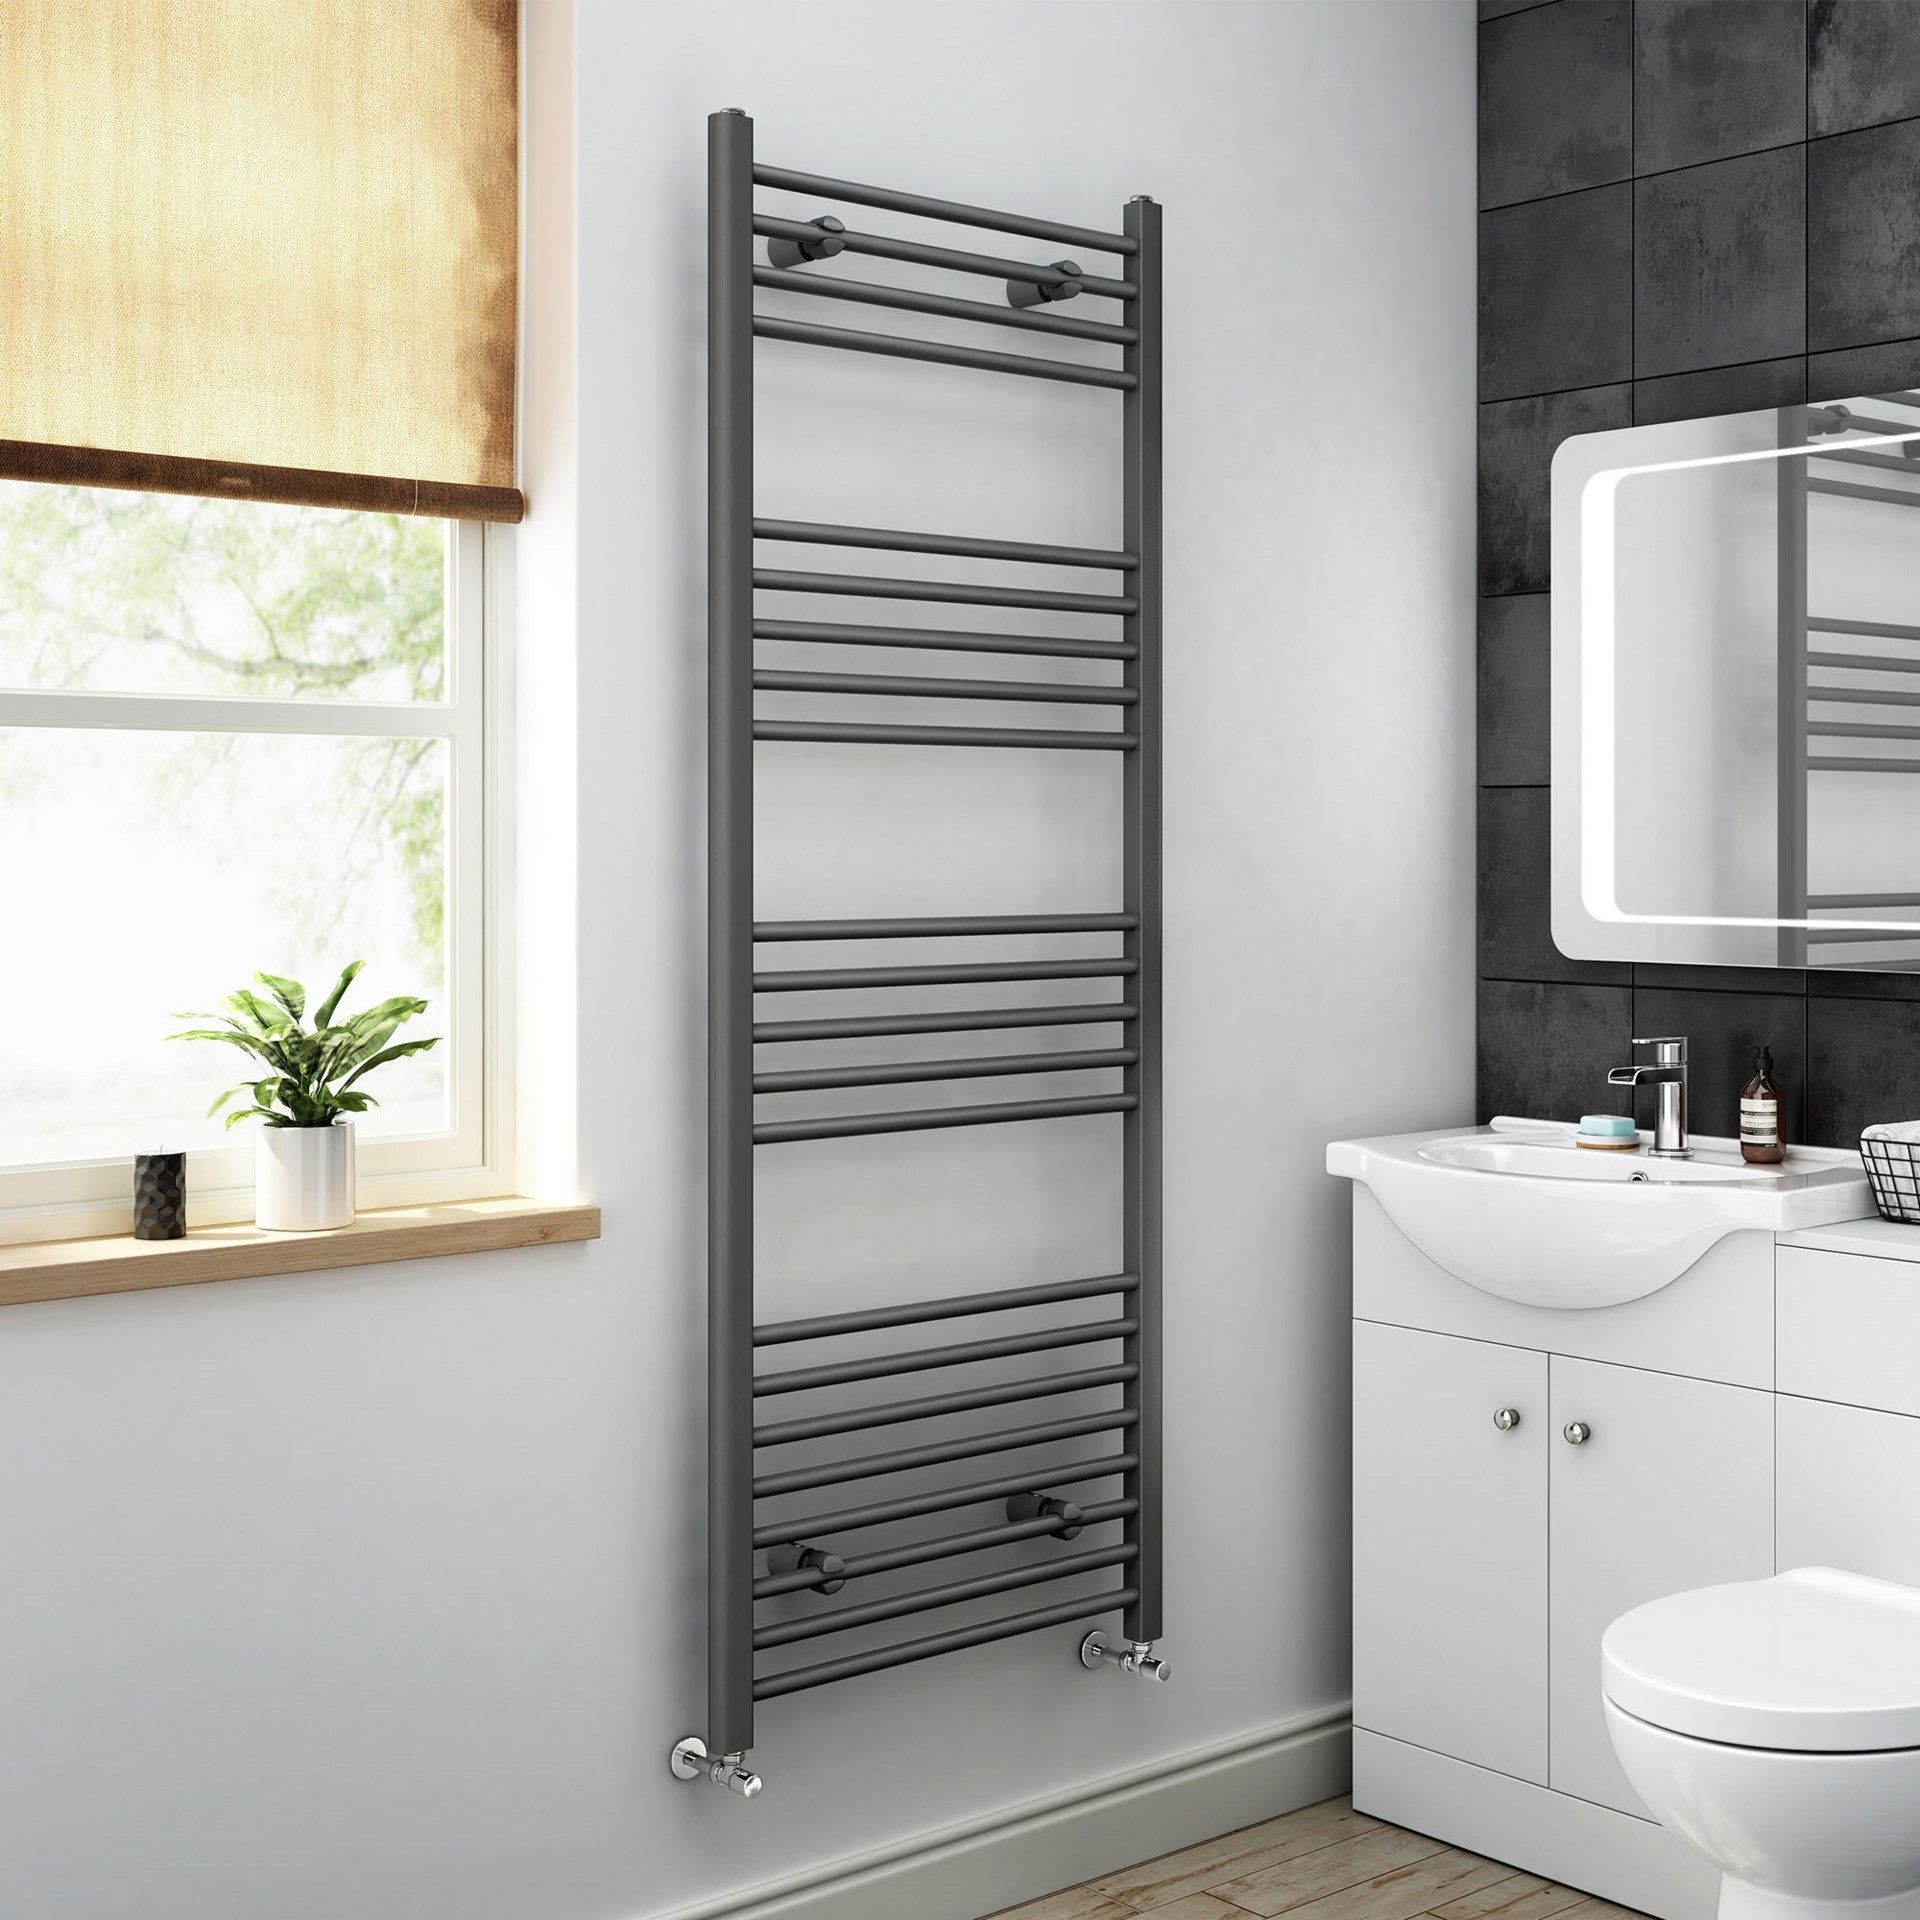 5 BRAND NEW BOXED 1600x450mm - 20mm Tubes - Anthracite Heated Straight Rail Ladder Towel Radiator.